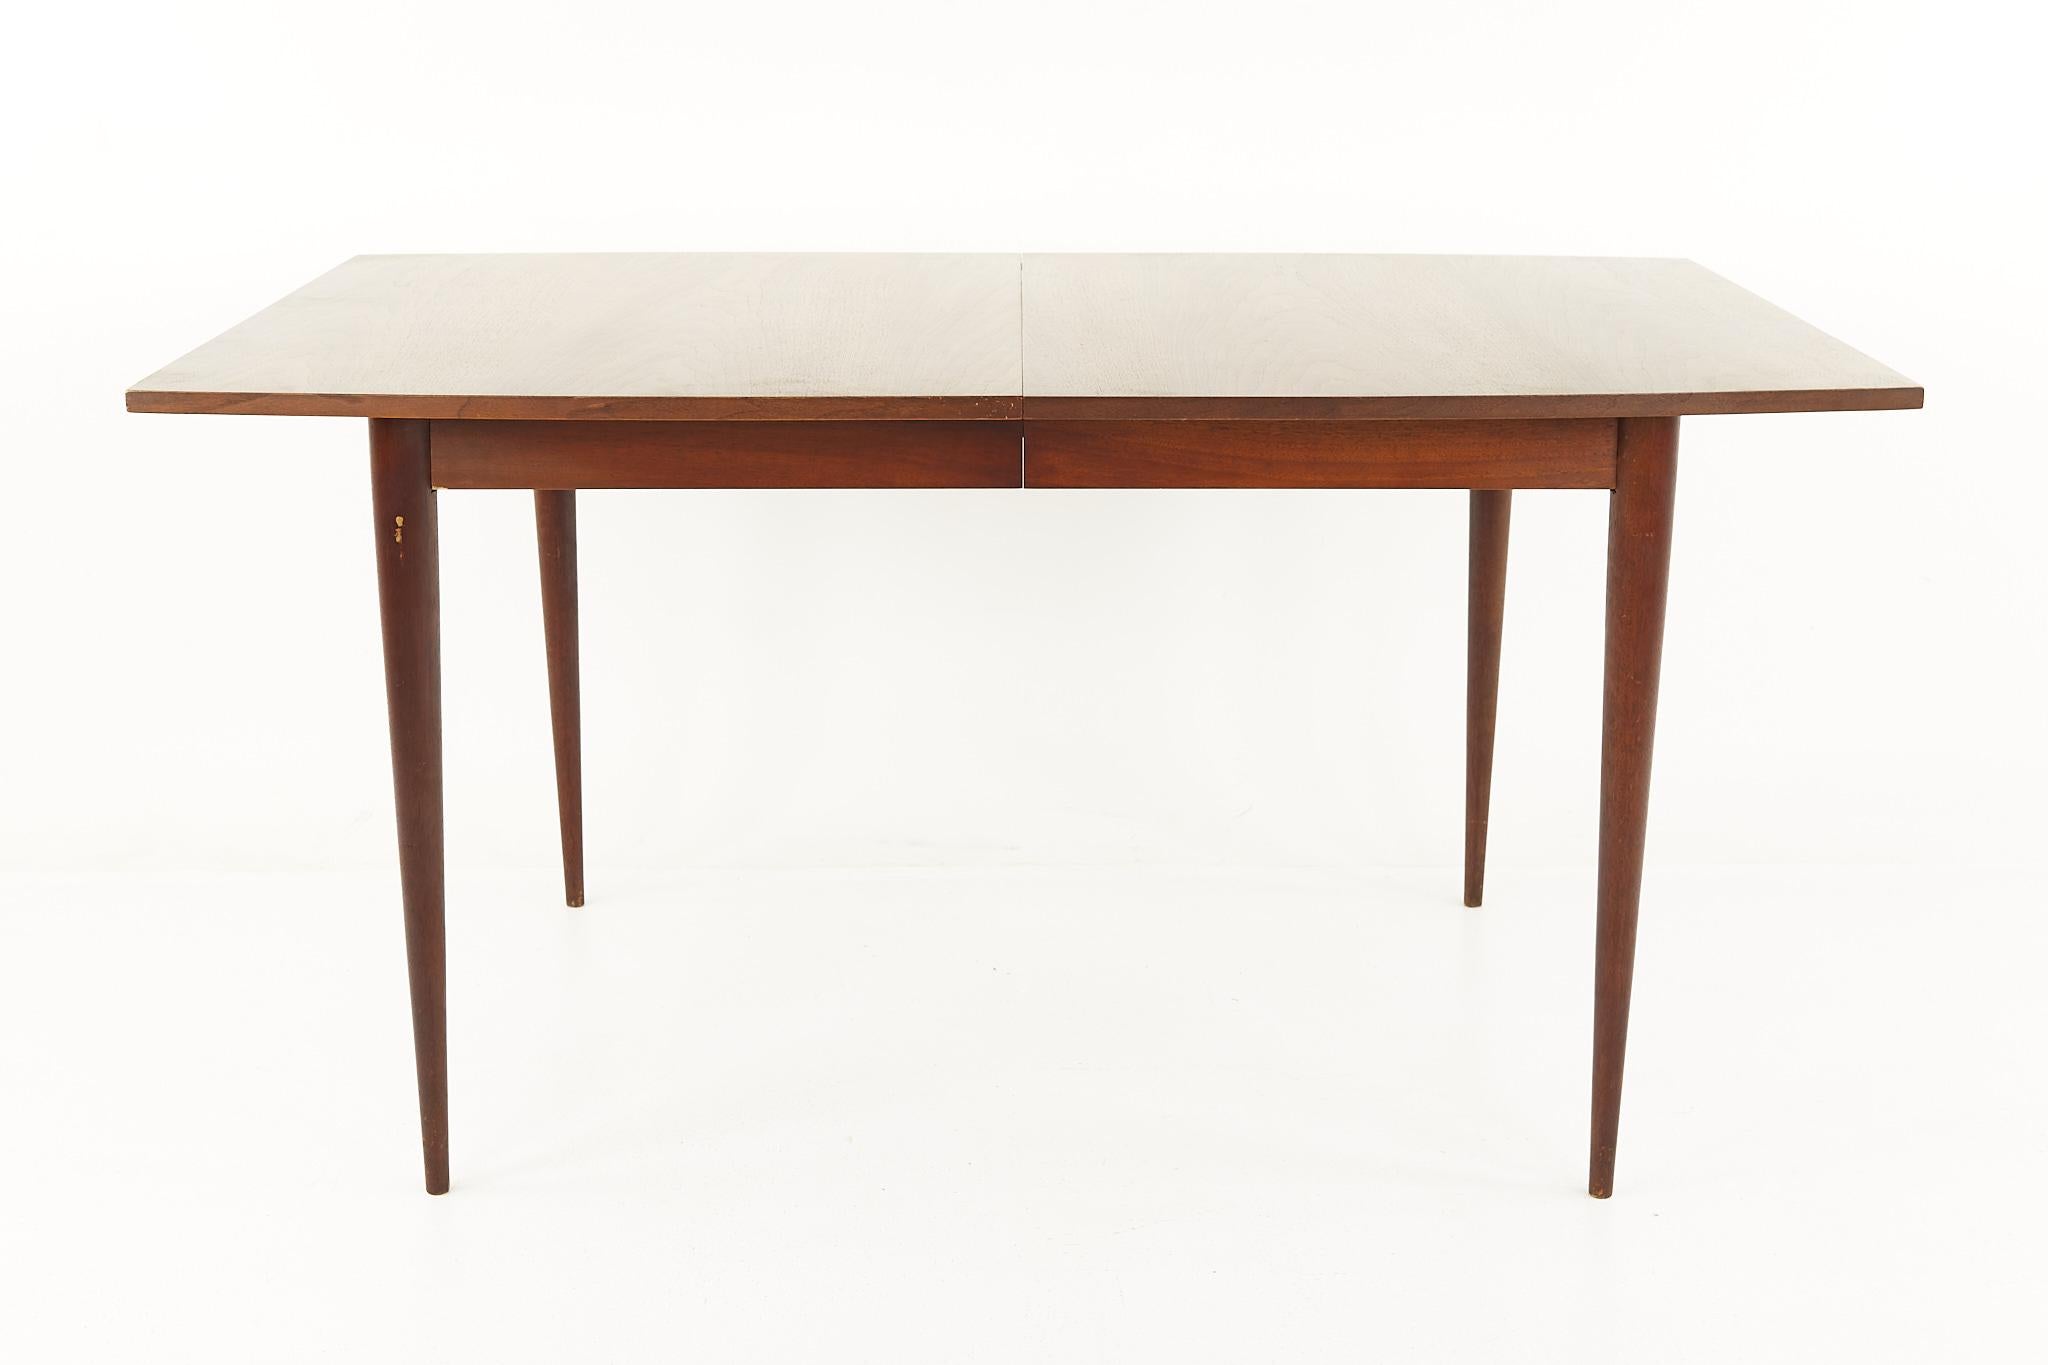 Broyhill Sculptra Mid Century Walnut Dining Table with 3 Leaves

This table measures: 60 wide x 40 deep x 29.75 inches high, with a chair clearance of 26.75 inches, each of the 3 leaves measure 12 inches wide, making a maximum table width of 96